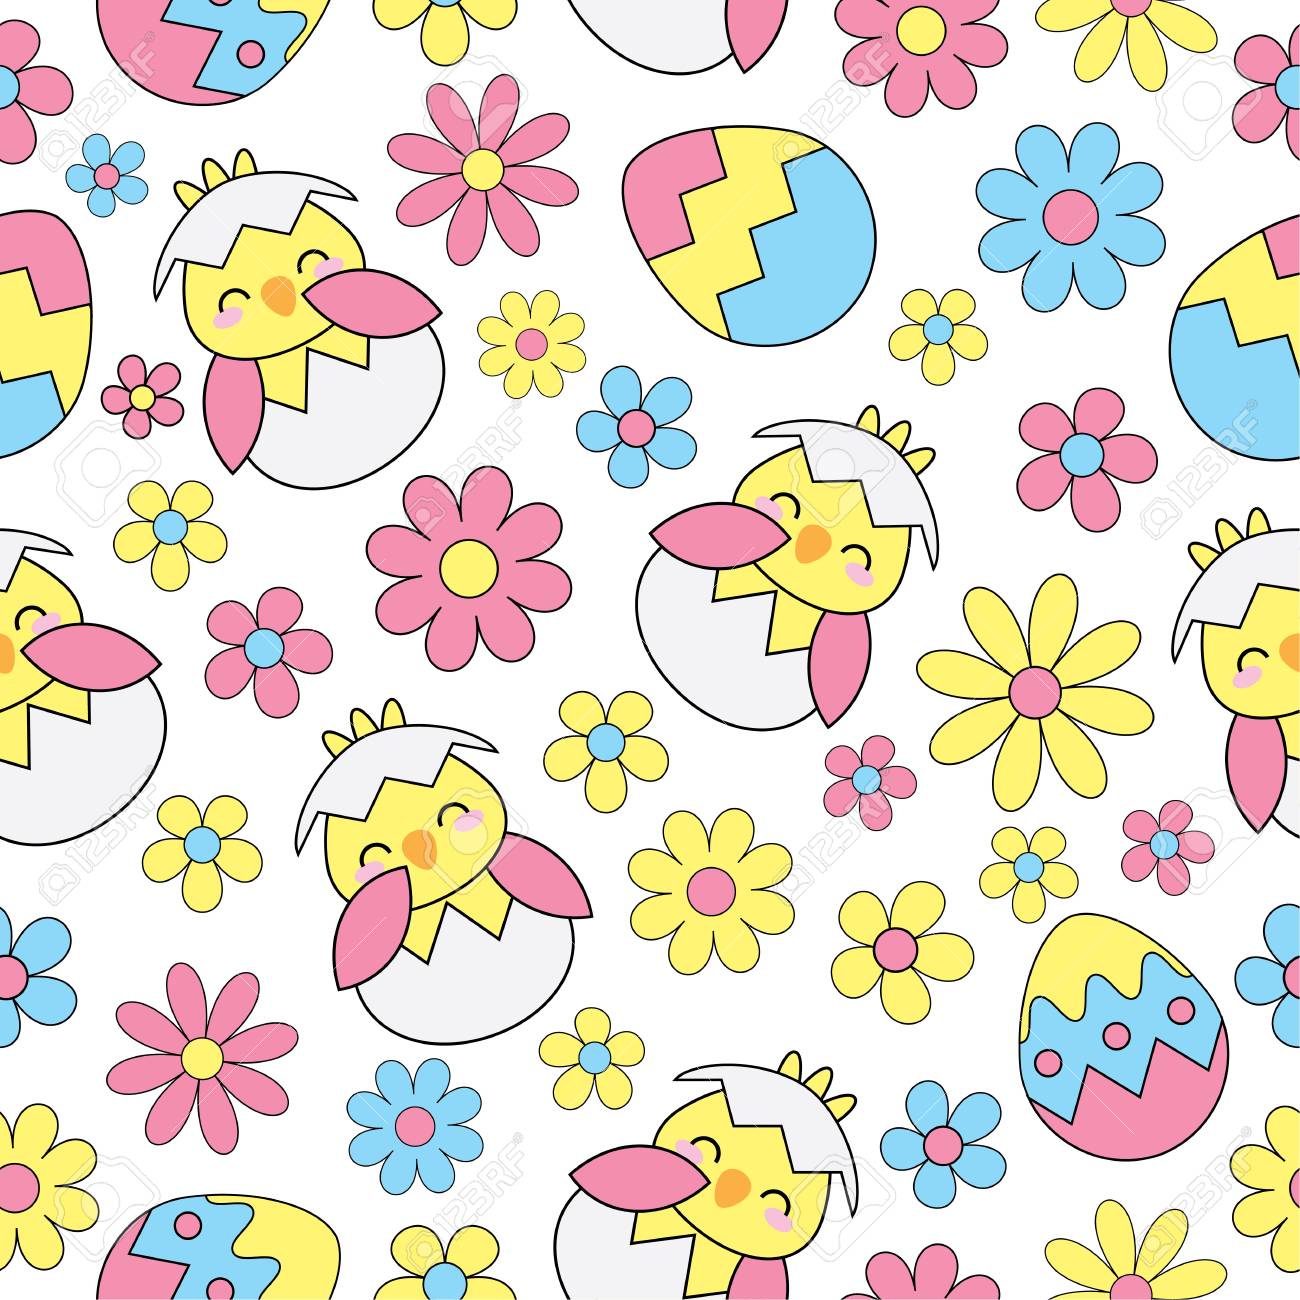 Easter Seamless Background With Cute Chick Eggs And Flowers